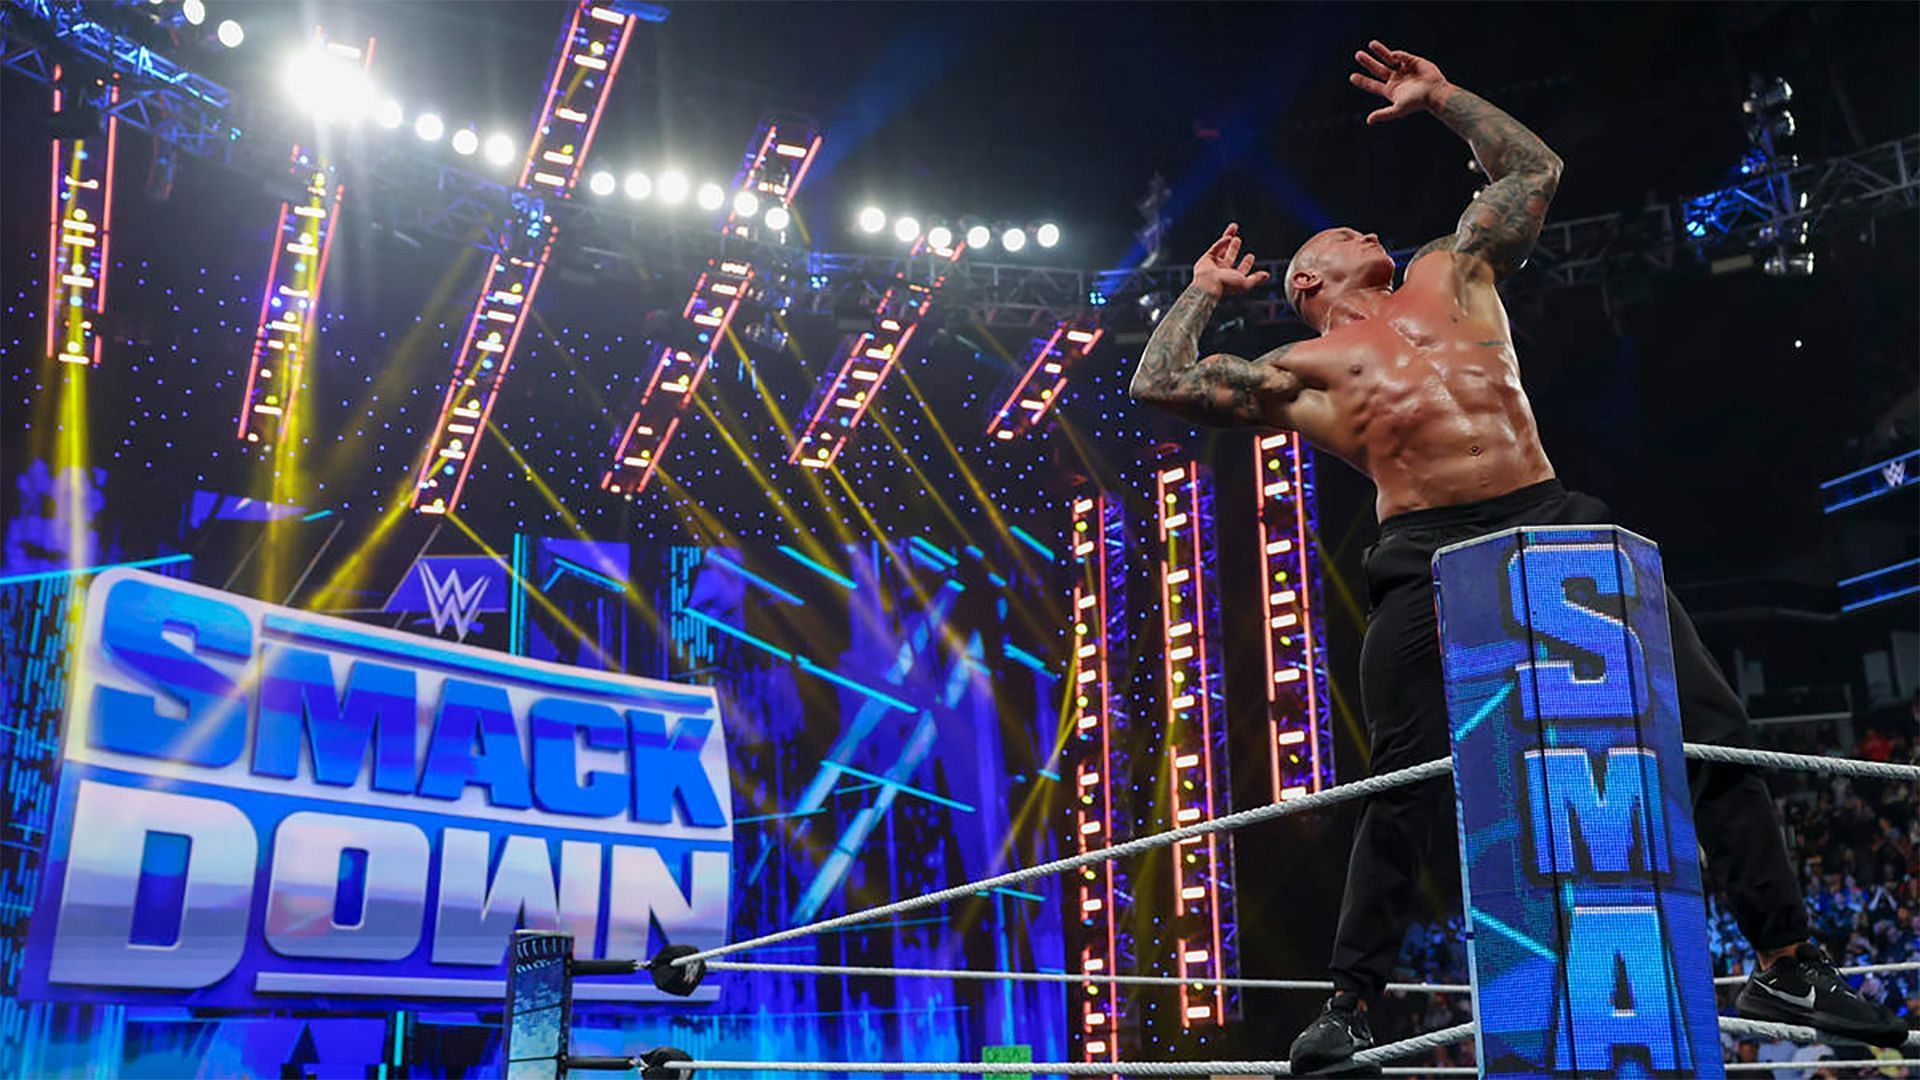 Randy Orton poses for fans on WWE SmackDown